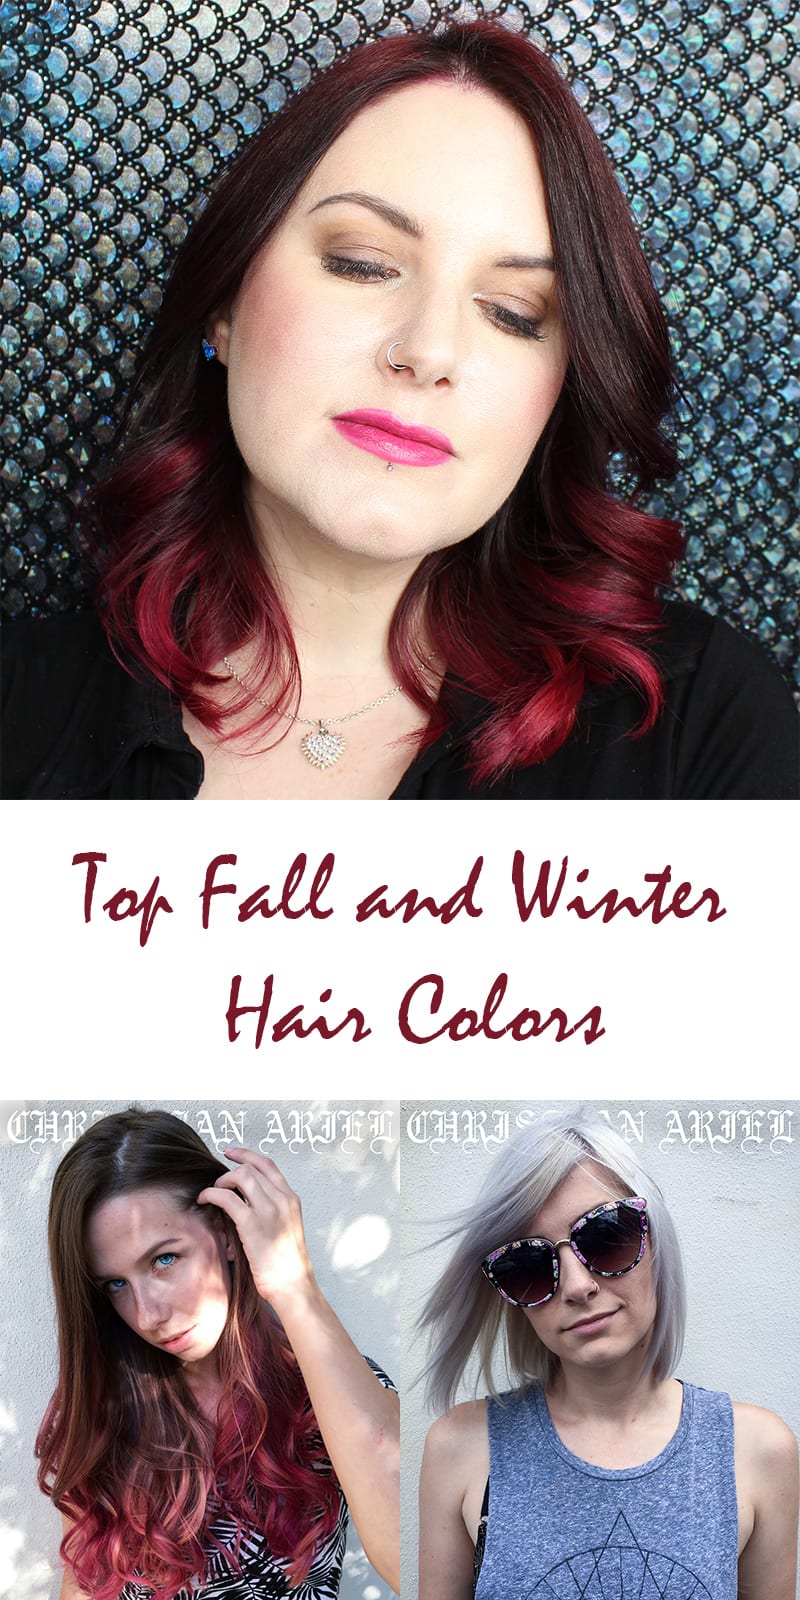 Top Fall and Winter Hair Colors